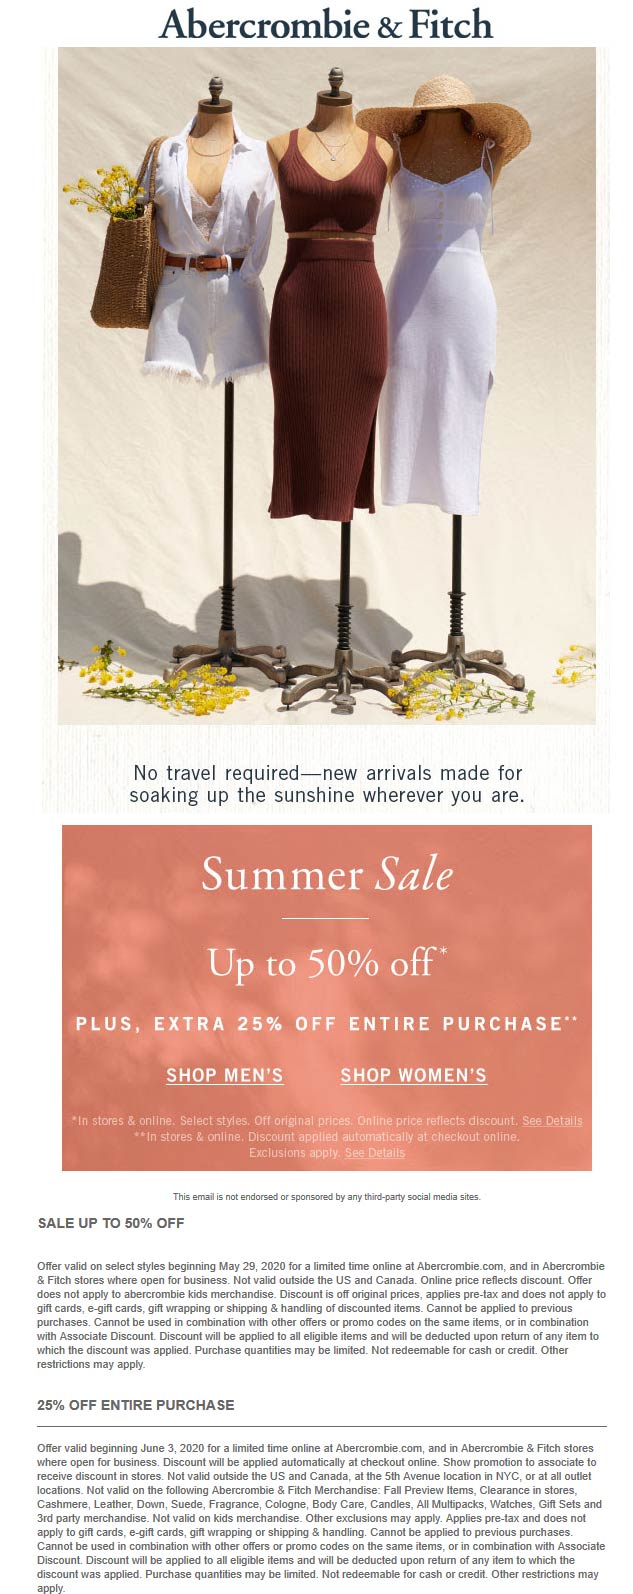 Abercrombie & Fitch stores Coupon  25% off everything at Abercrombie & Fitch #abercrombiefitch